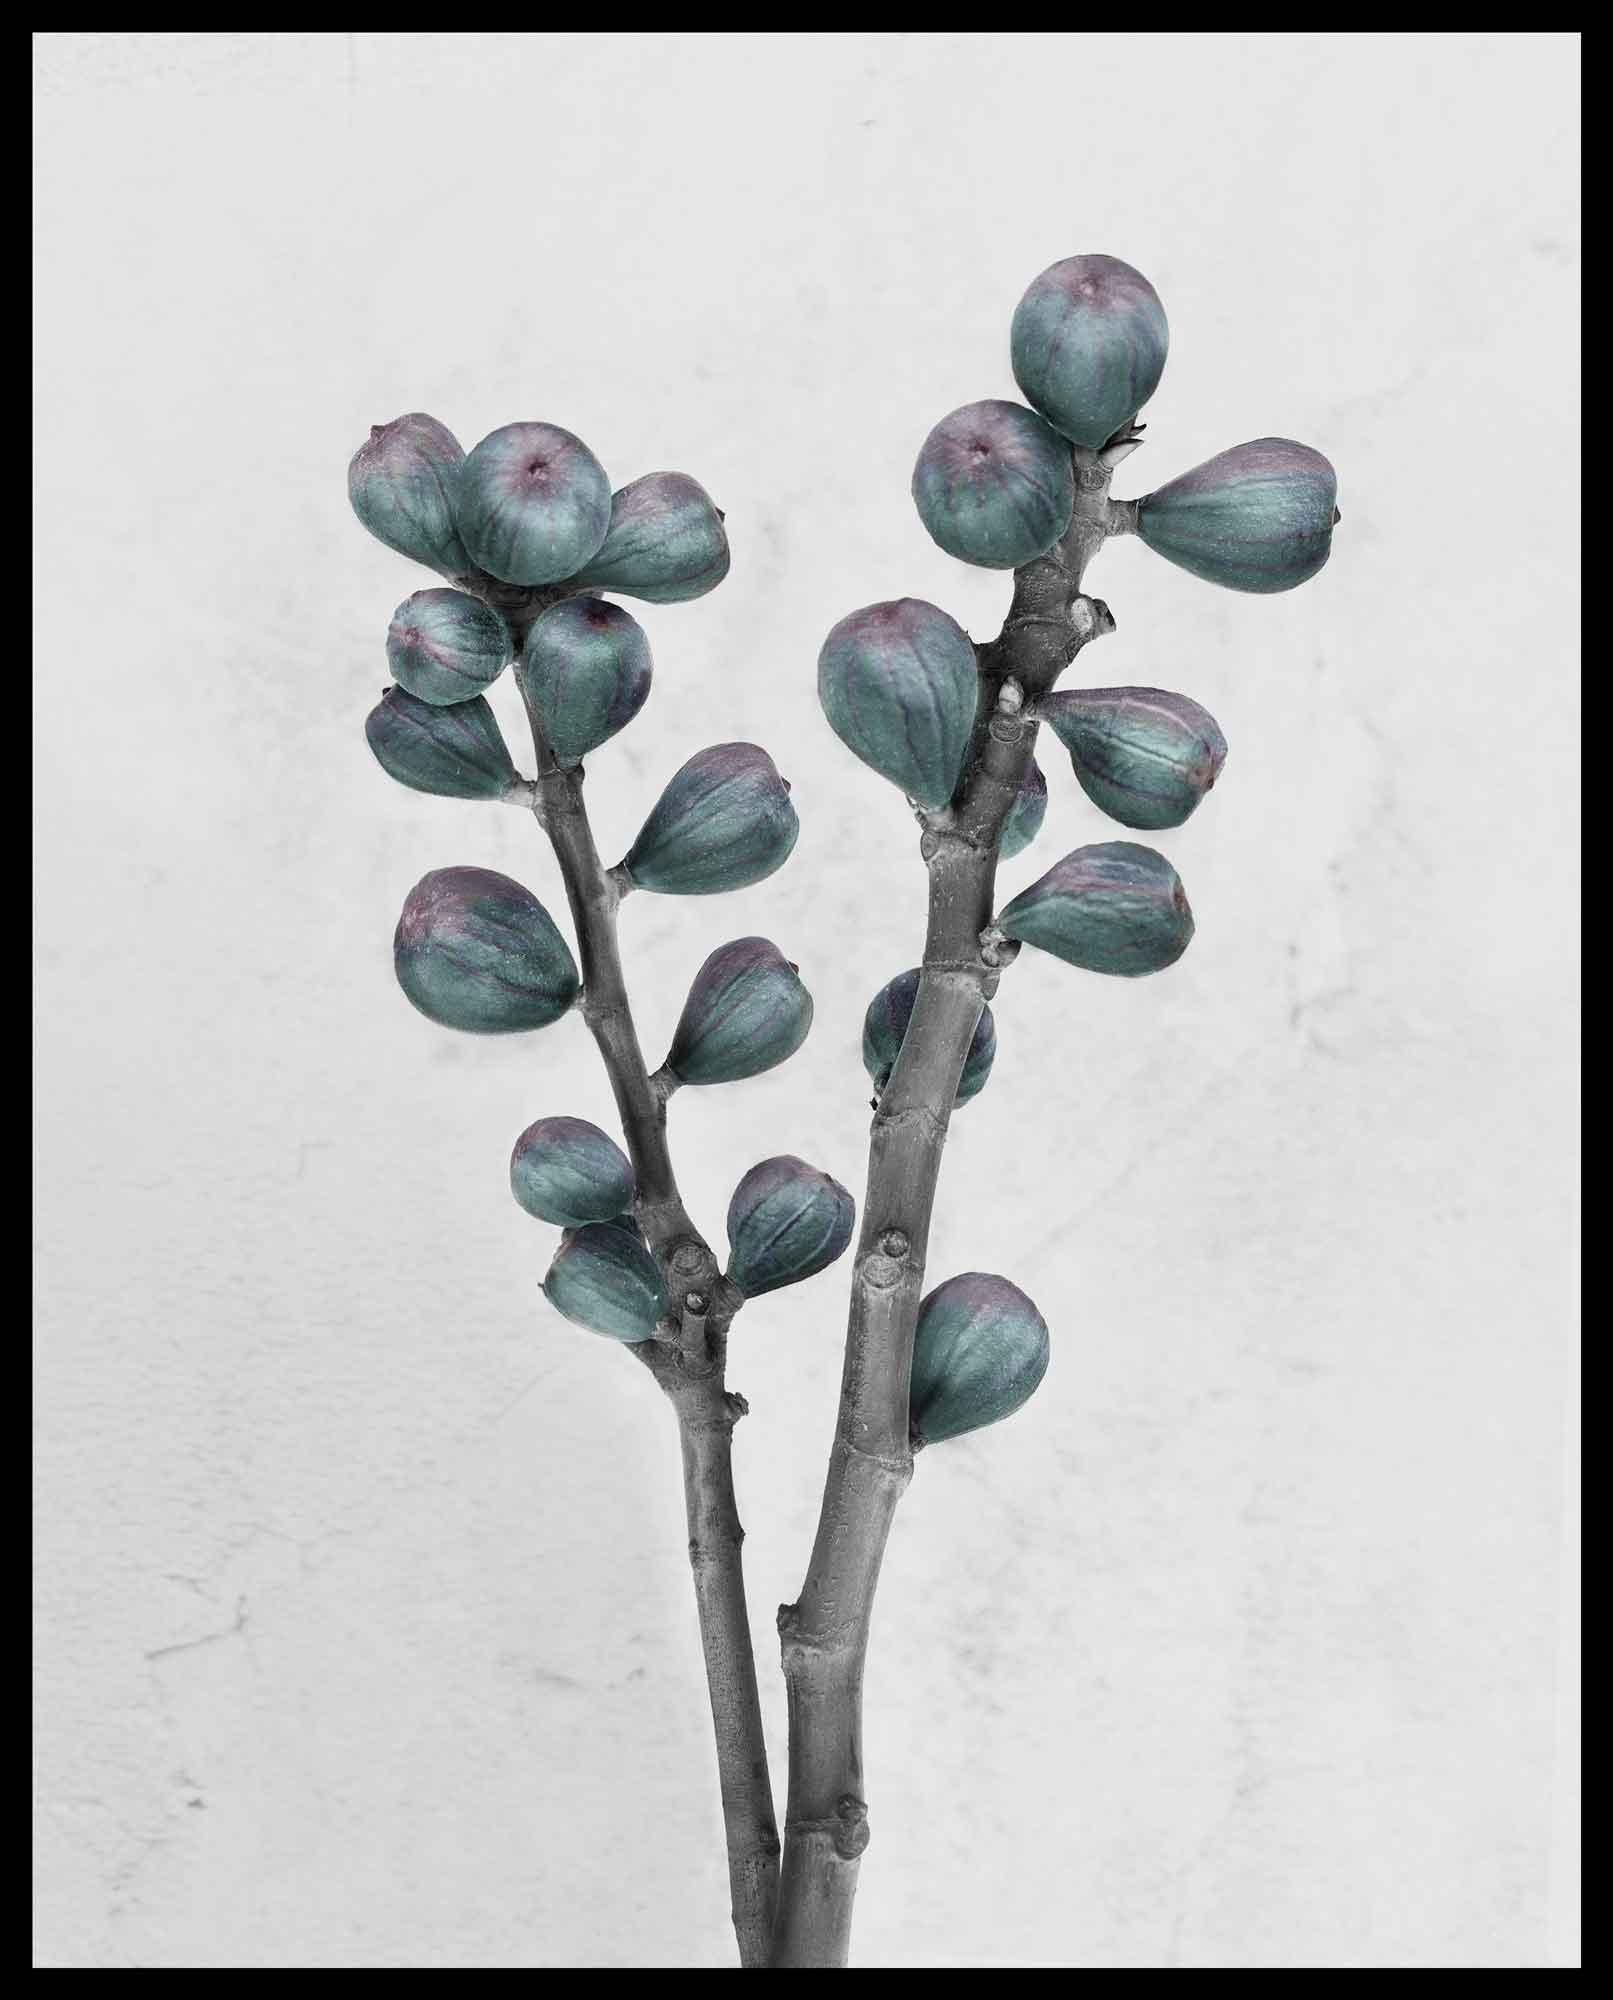 Botanica #27 (Ficus Carica) - Gray Still-Life Photograph by Vee Speers